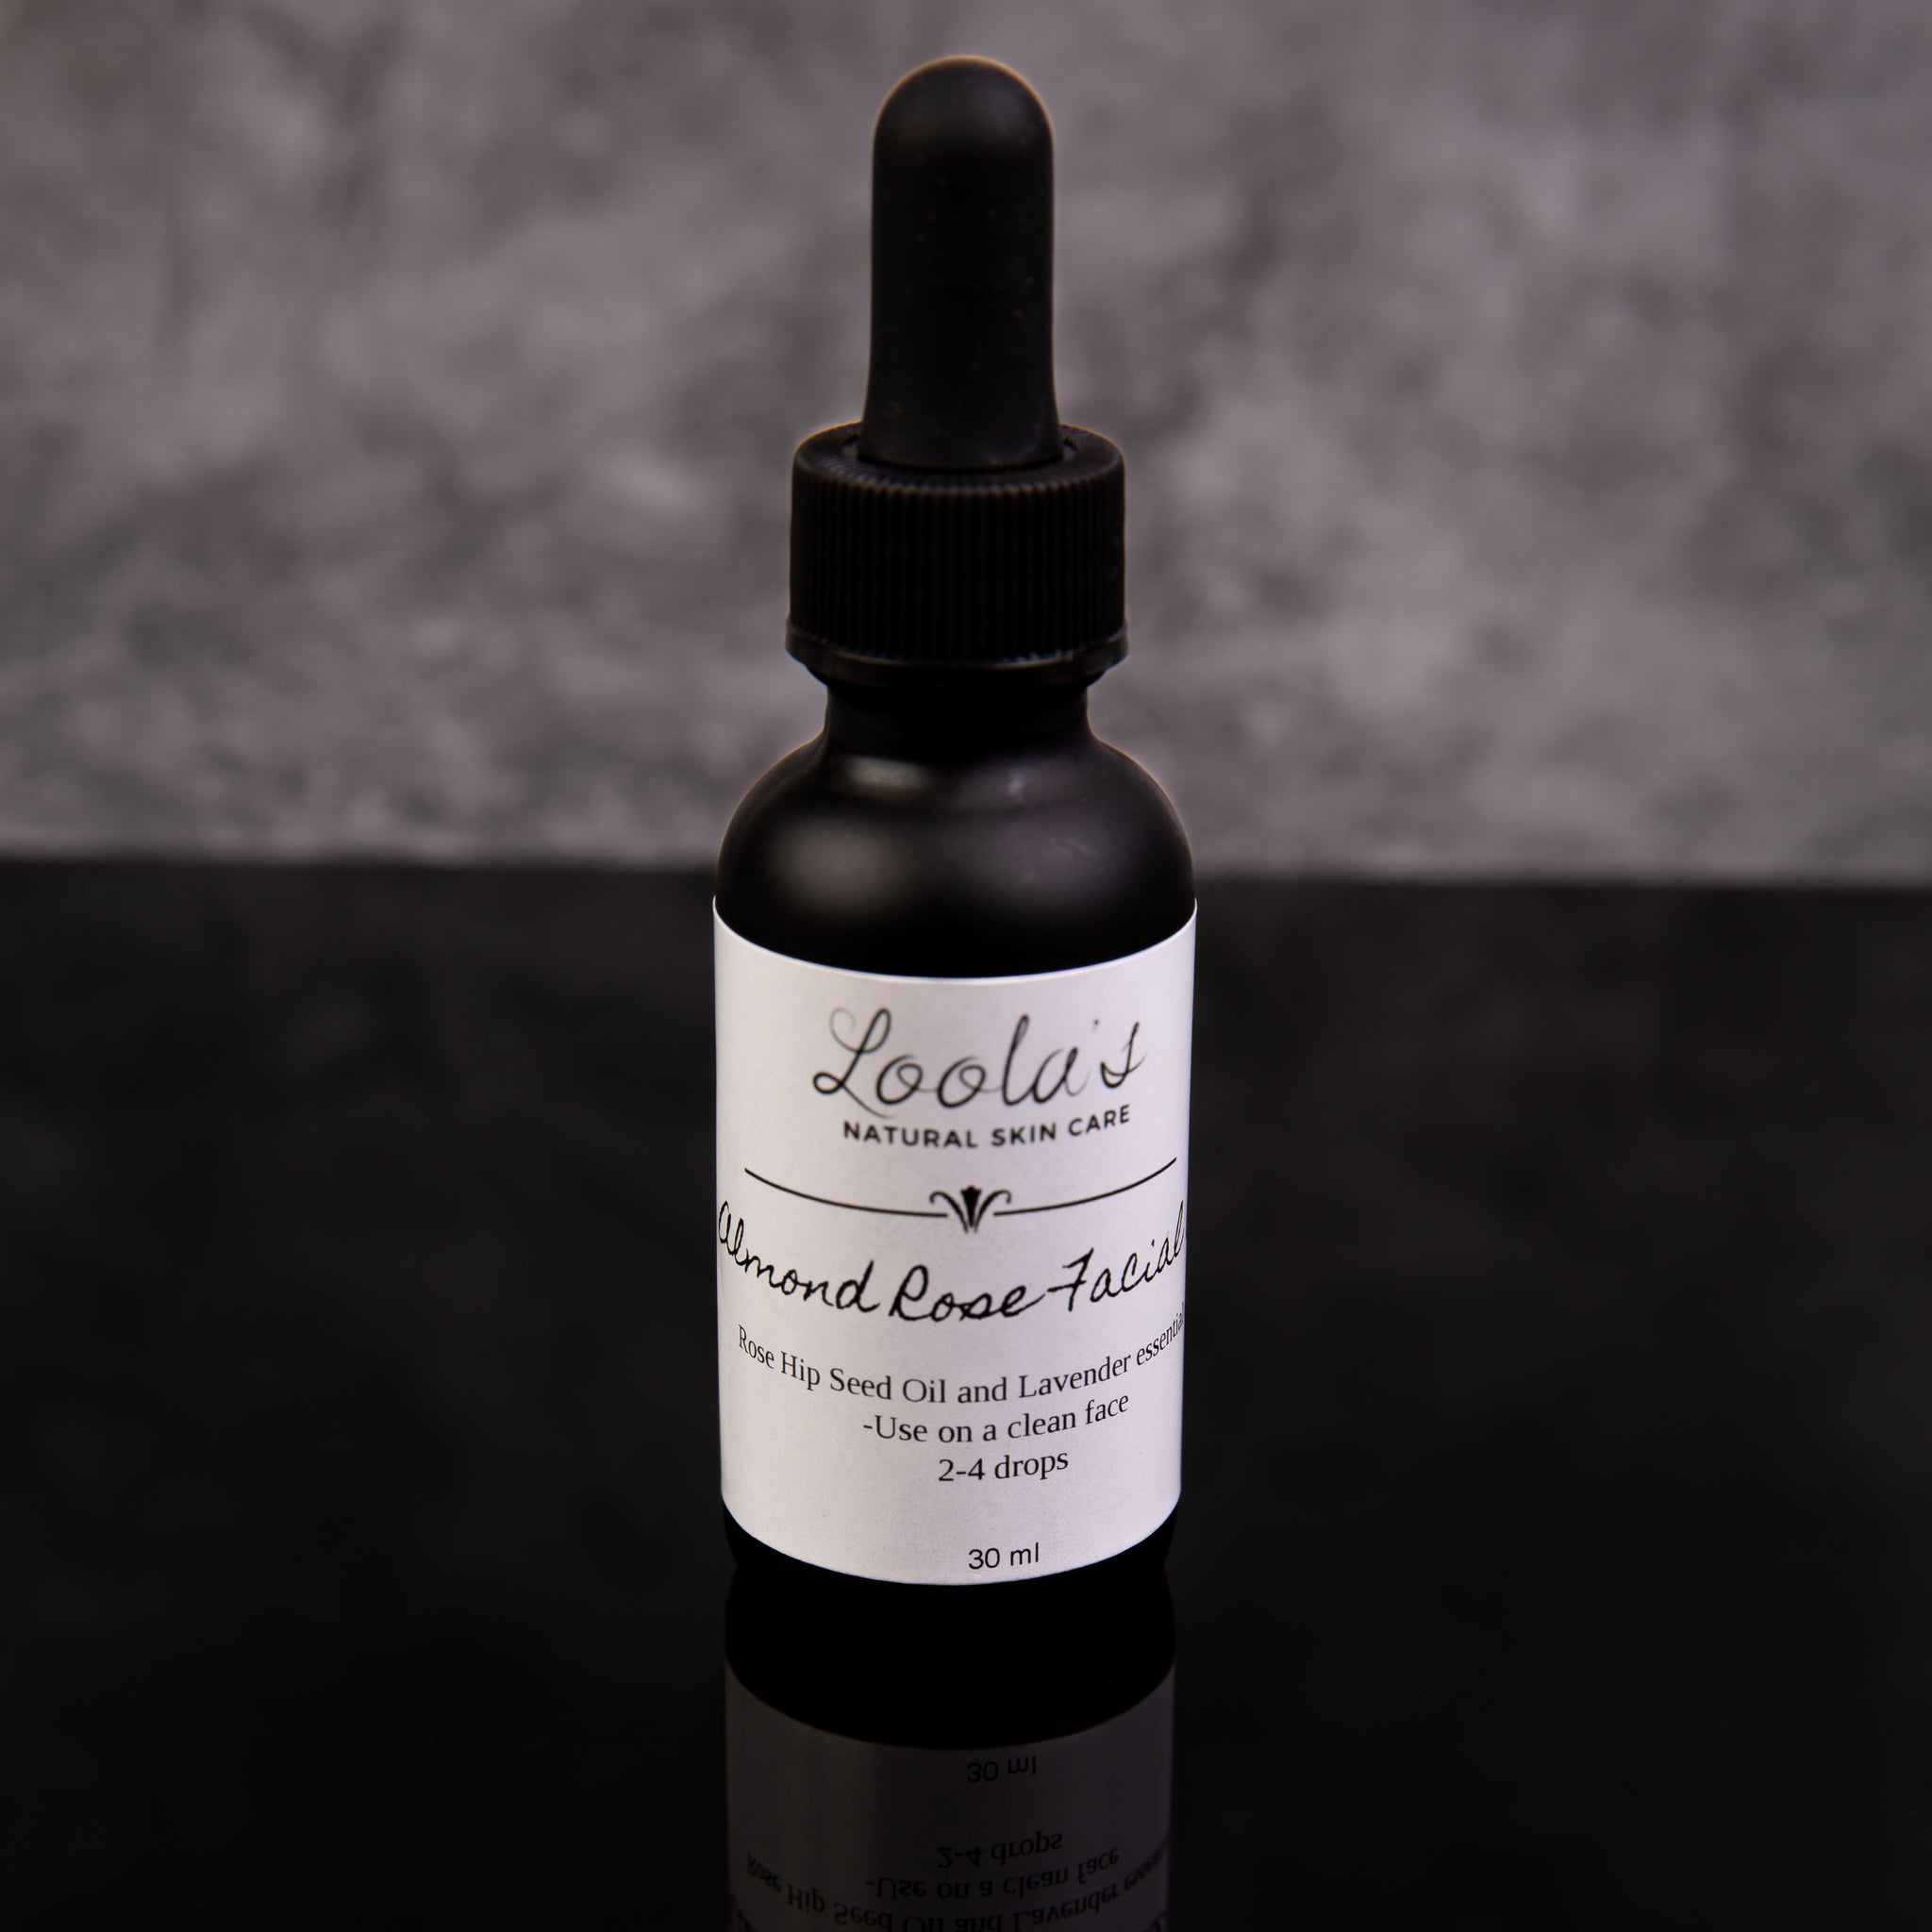  "Glass dropper bottle of Loola's Natural Skin Care Almond Rose Facial Oil, 30 ml, on reflective surface with ingredients listed as rose Hip Seed Oil and Lavender, against a grey stone background.